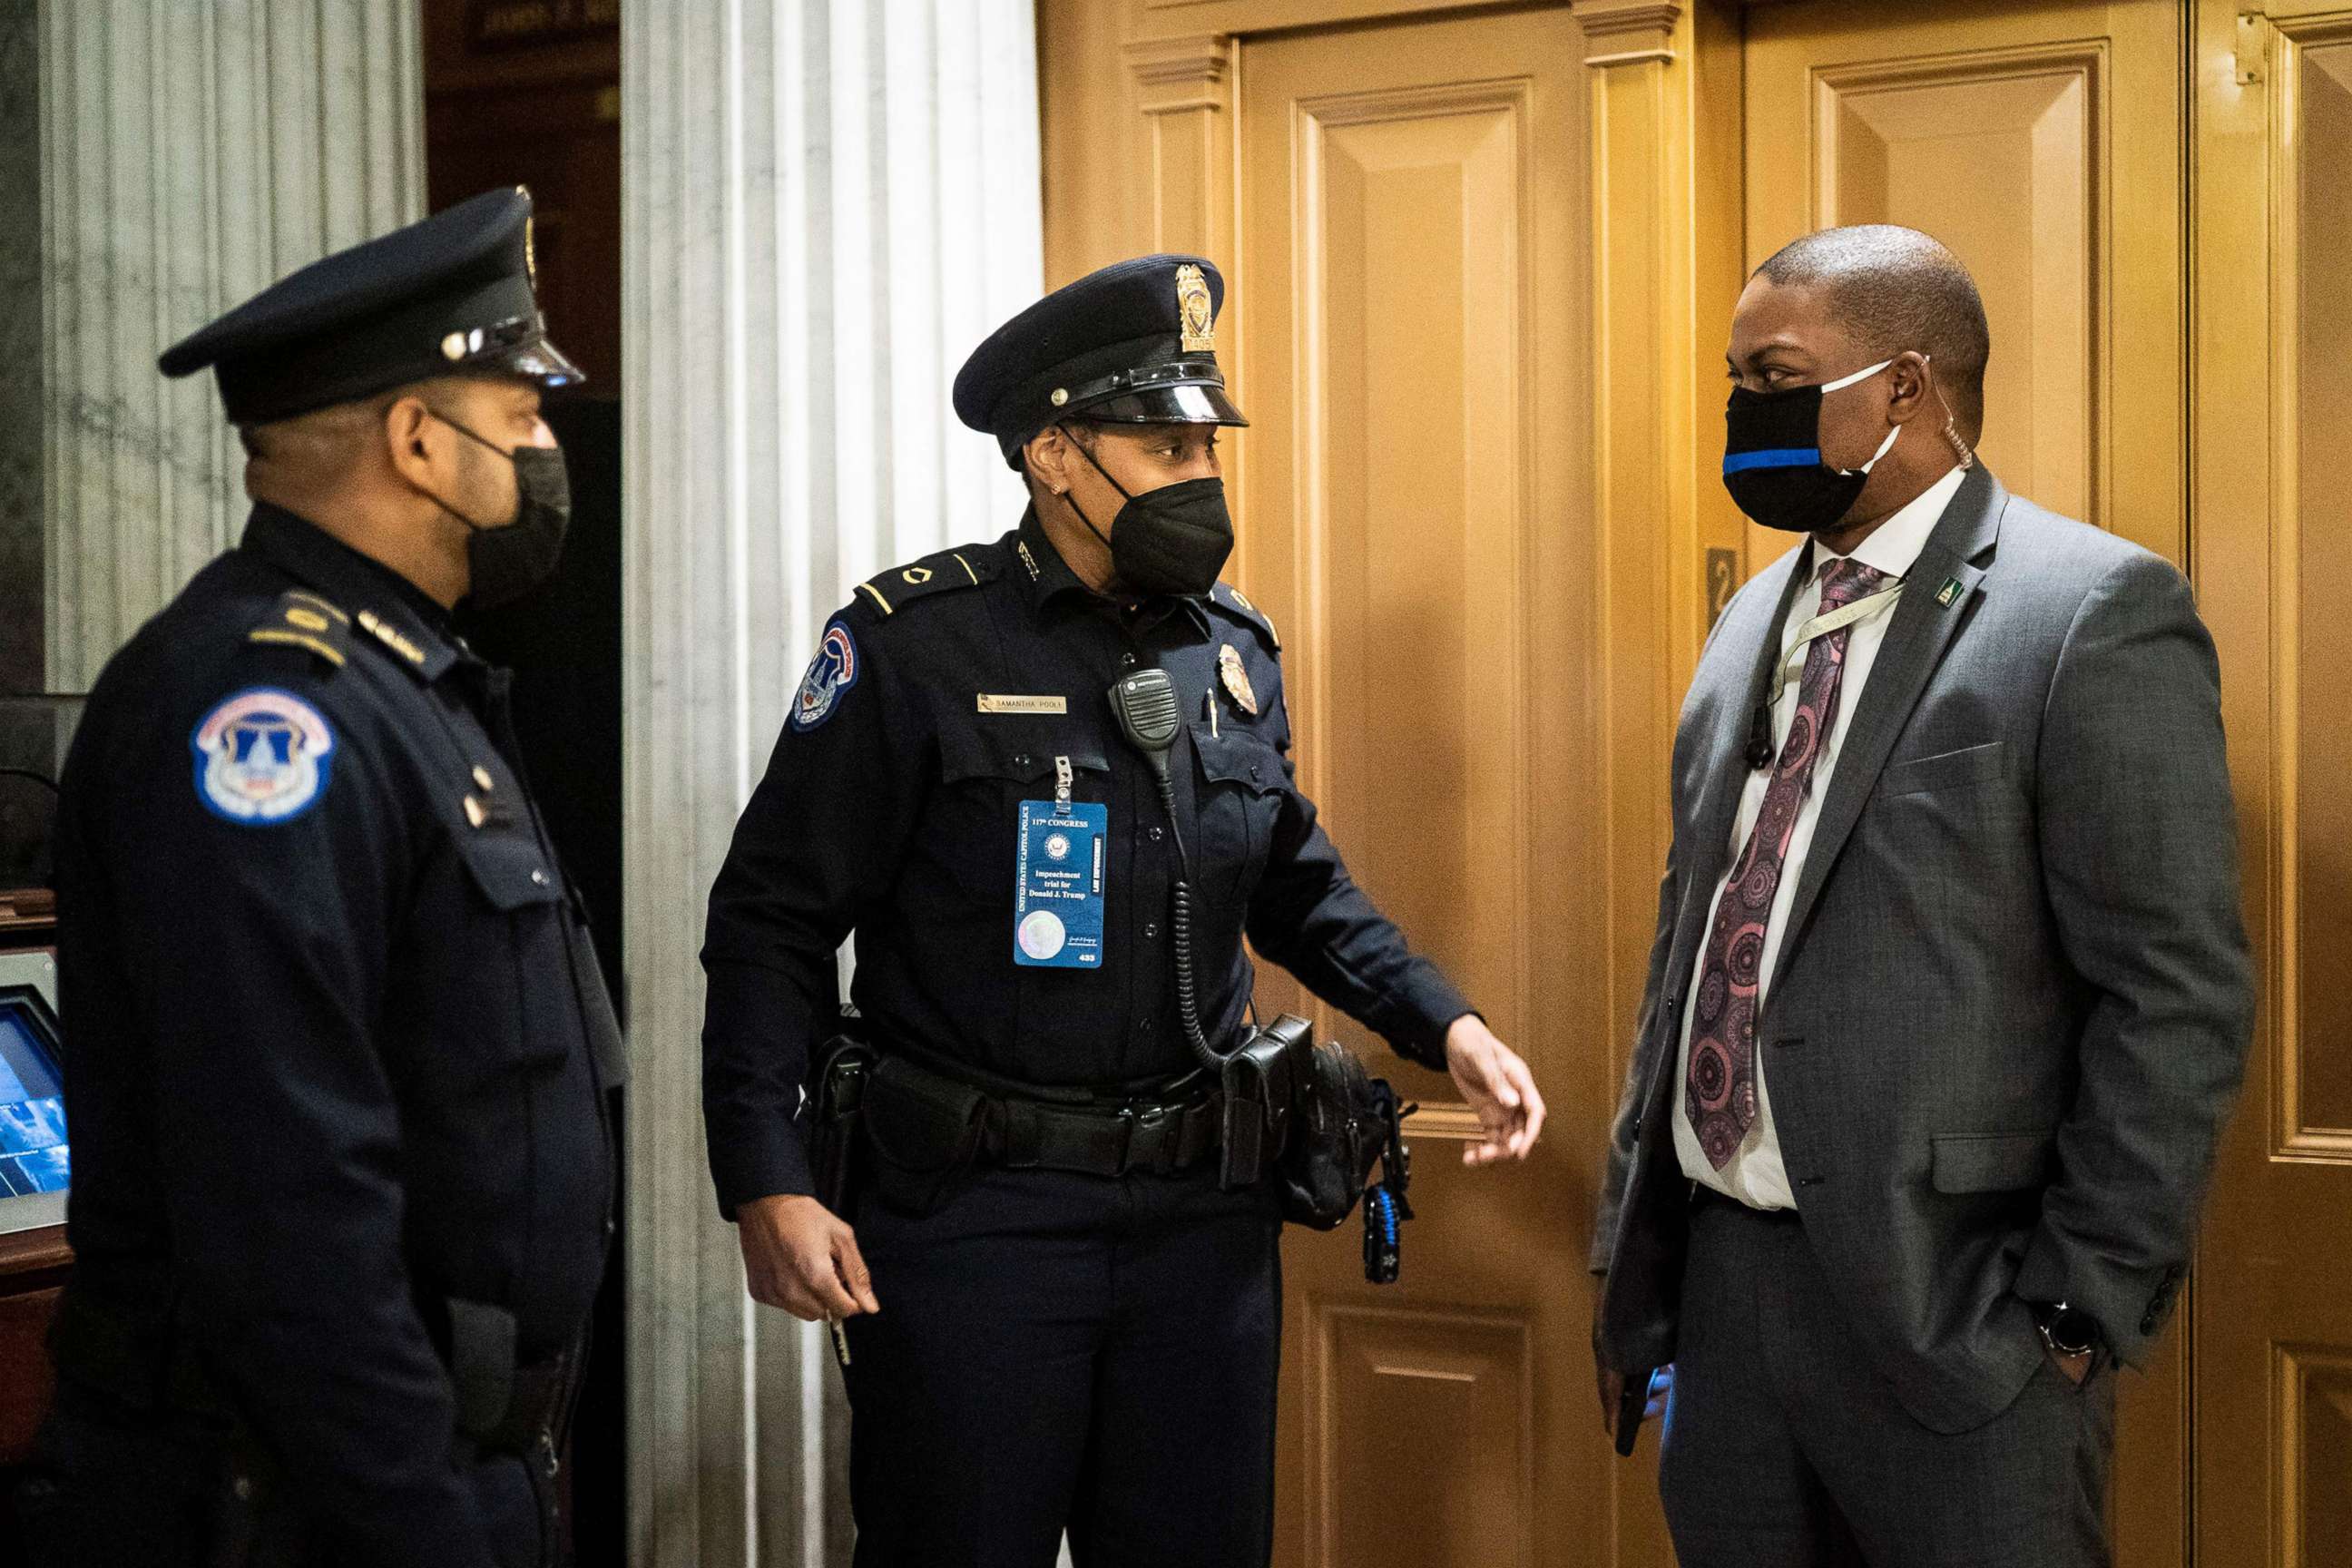 PHOTO: Capitol Hill Police Officer Eugene Goodman speaks with officers after the fourth day of the Senate Impeachment trials for former President Donald Trump on Capitol Hill, Feb. 12, 2021.